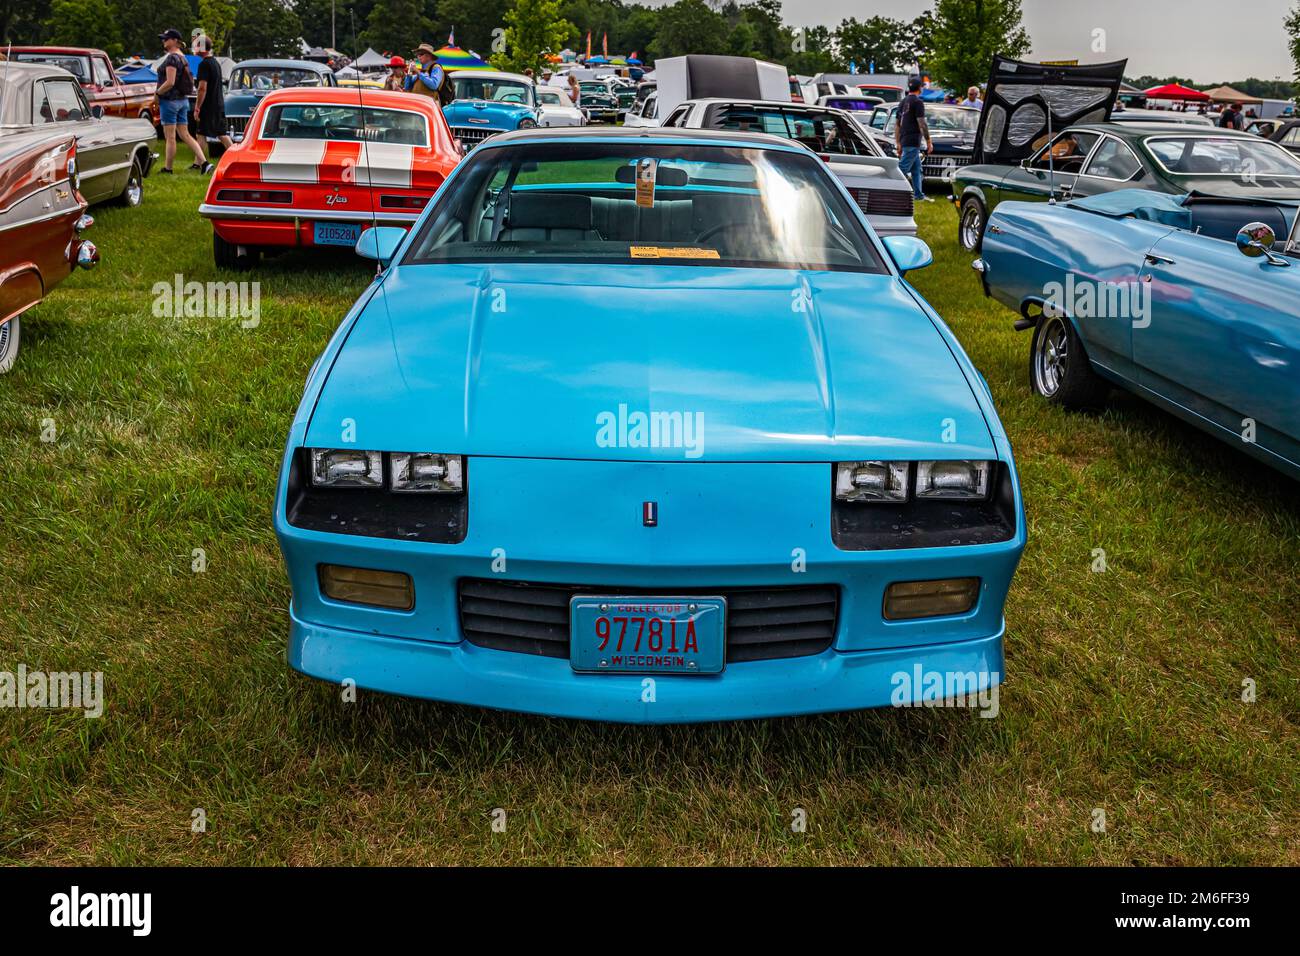 Iola, WI - July 07, 2022: High perspective front view of a 1990 Chevrolet Camaro RS Coupe at a local car show. Stock Photo